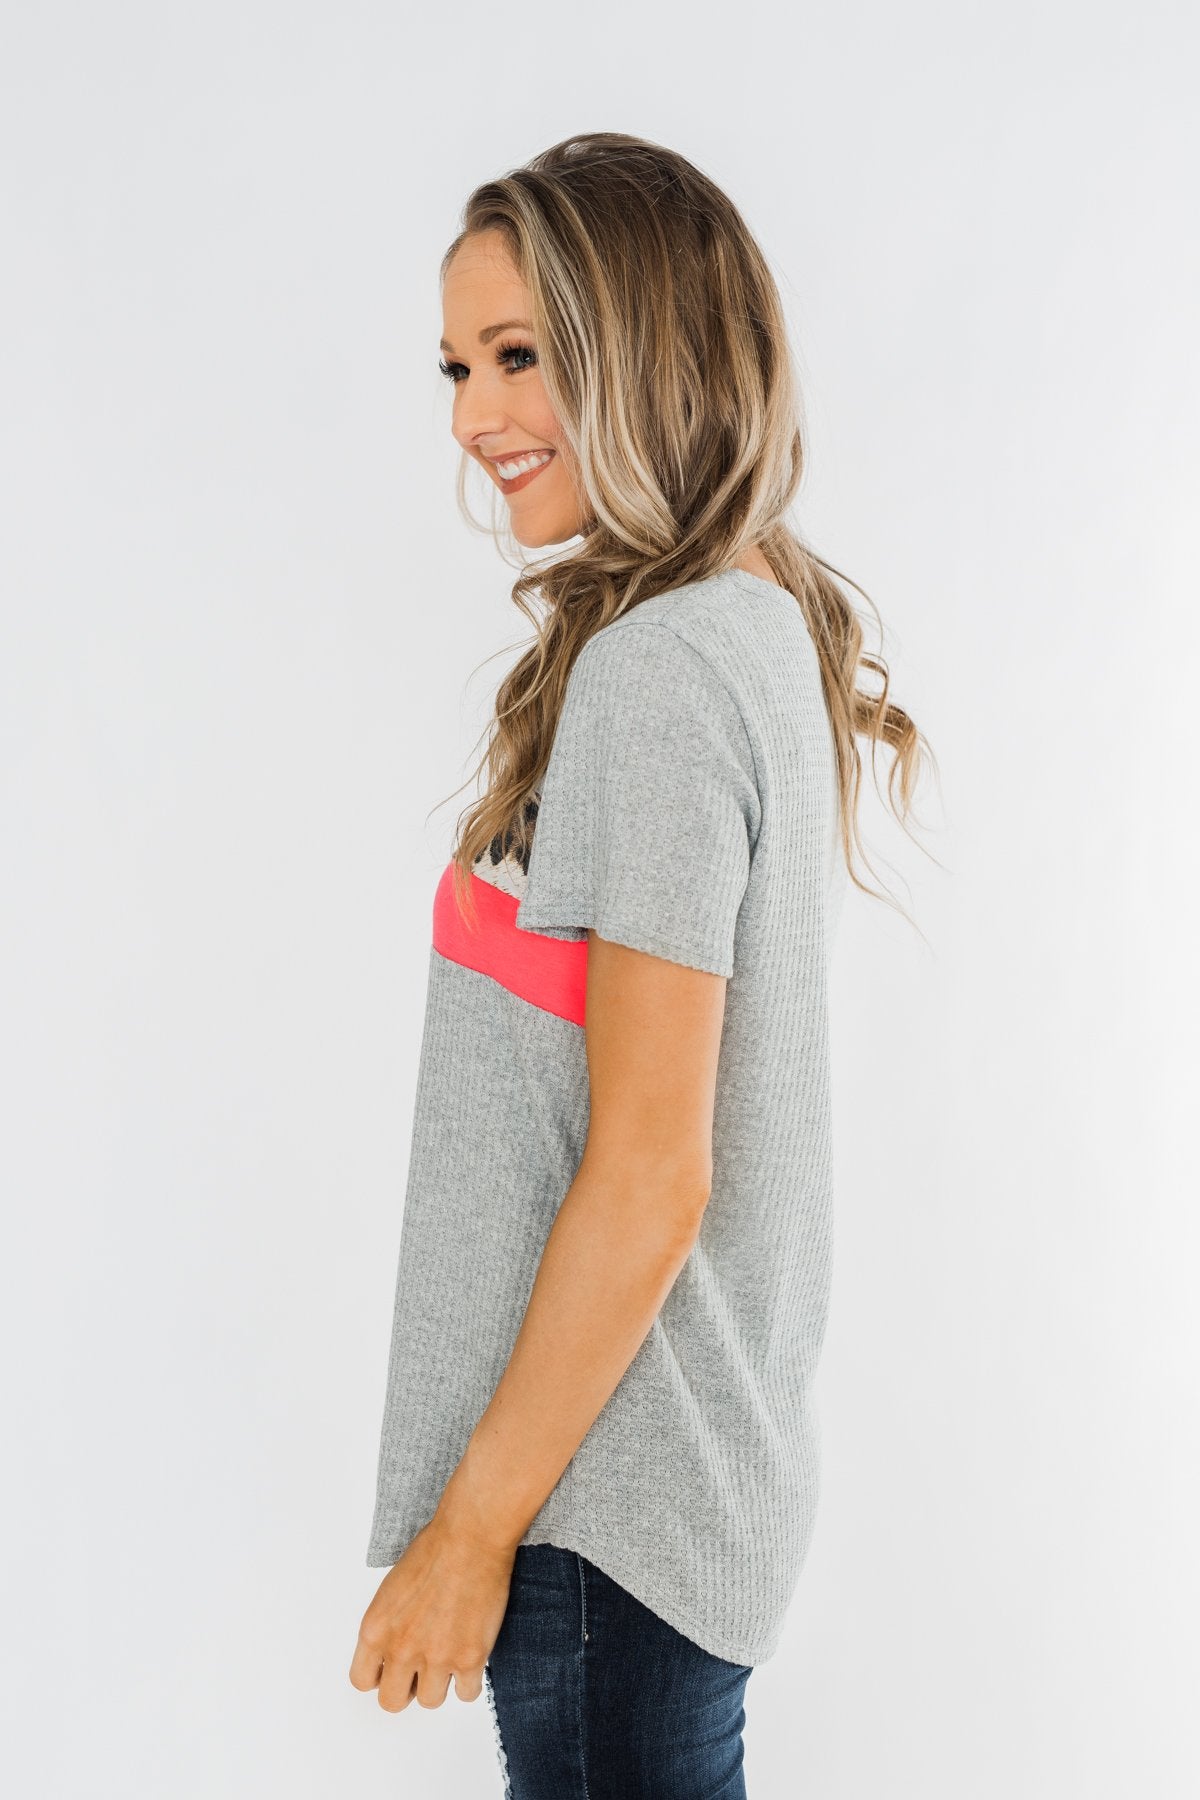 Up For An Adventure Striped Top- Heather Grey